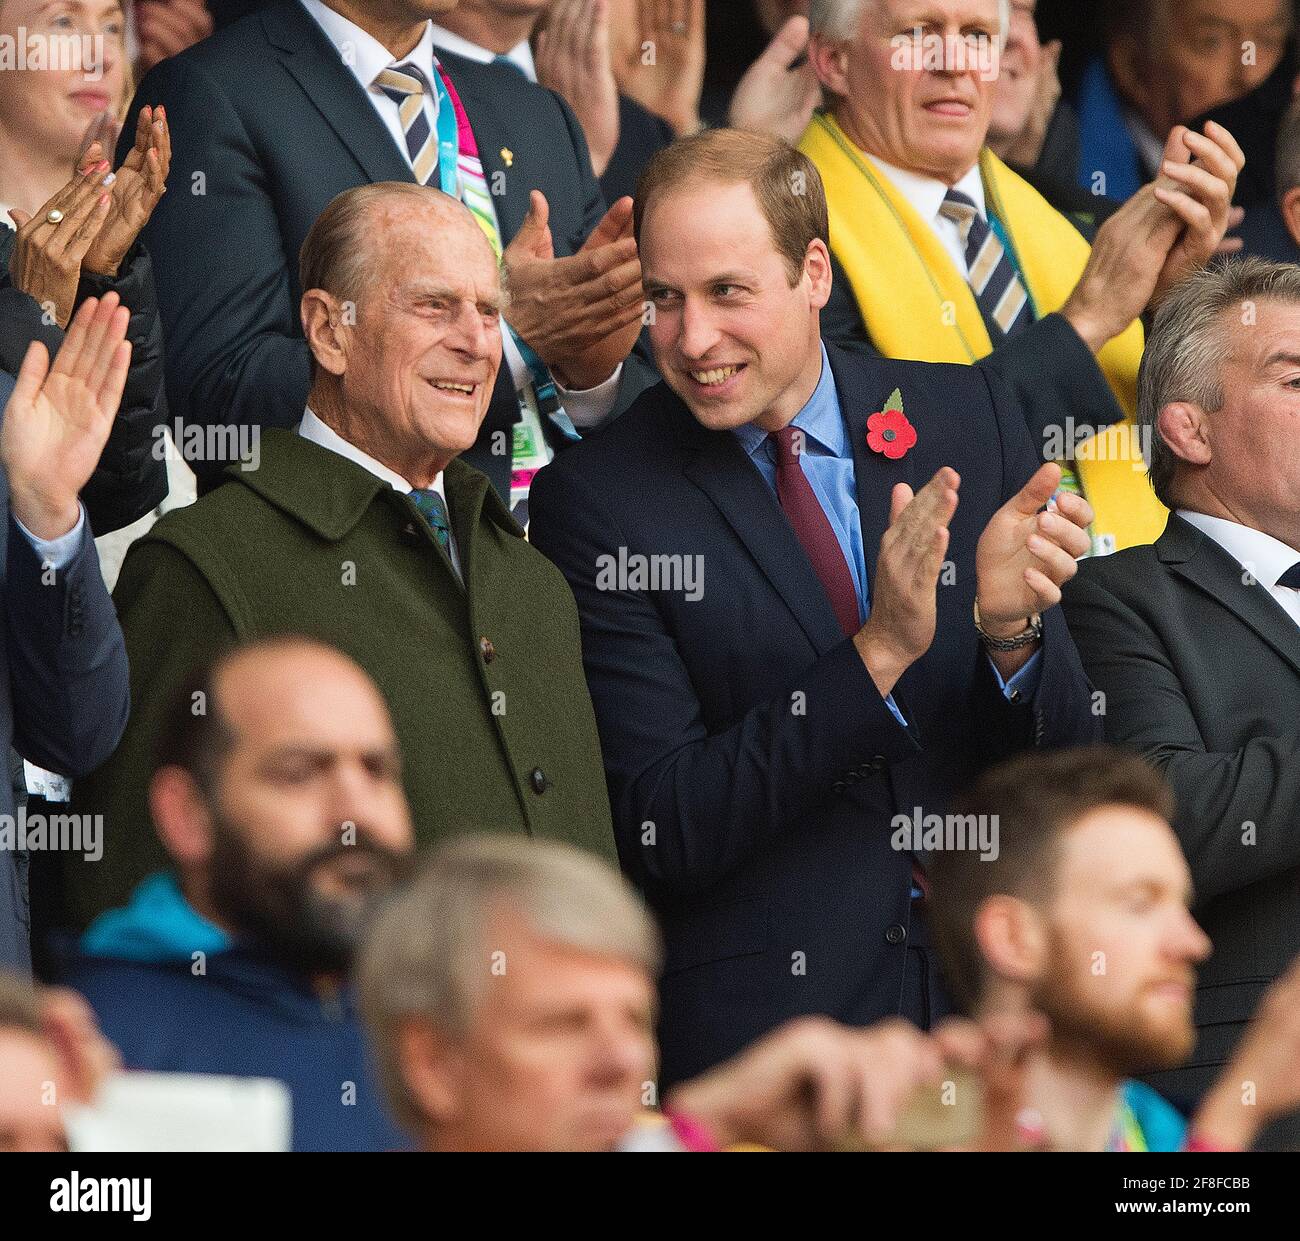 Prince Phillip The Duke Of Edinburgh and Prince William watching the Rugby World Cup Final at Twickenham 2015. Picture : Mark Pain Stock Photo